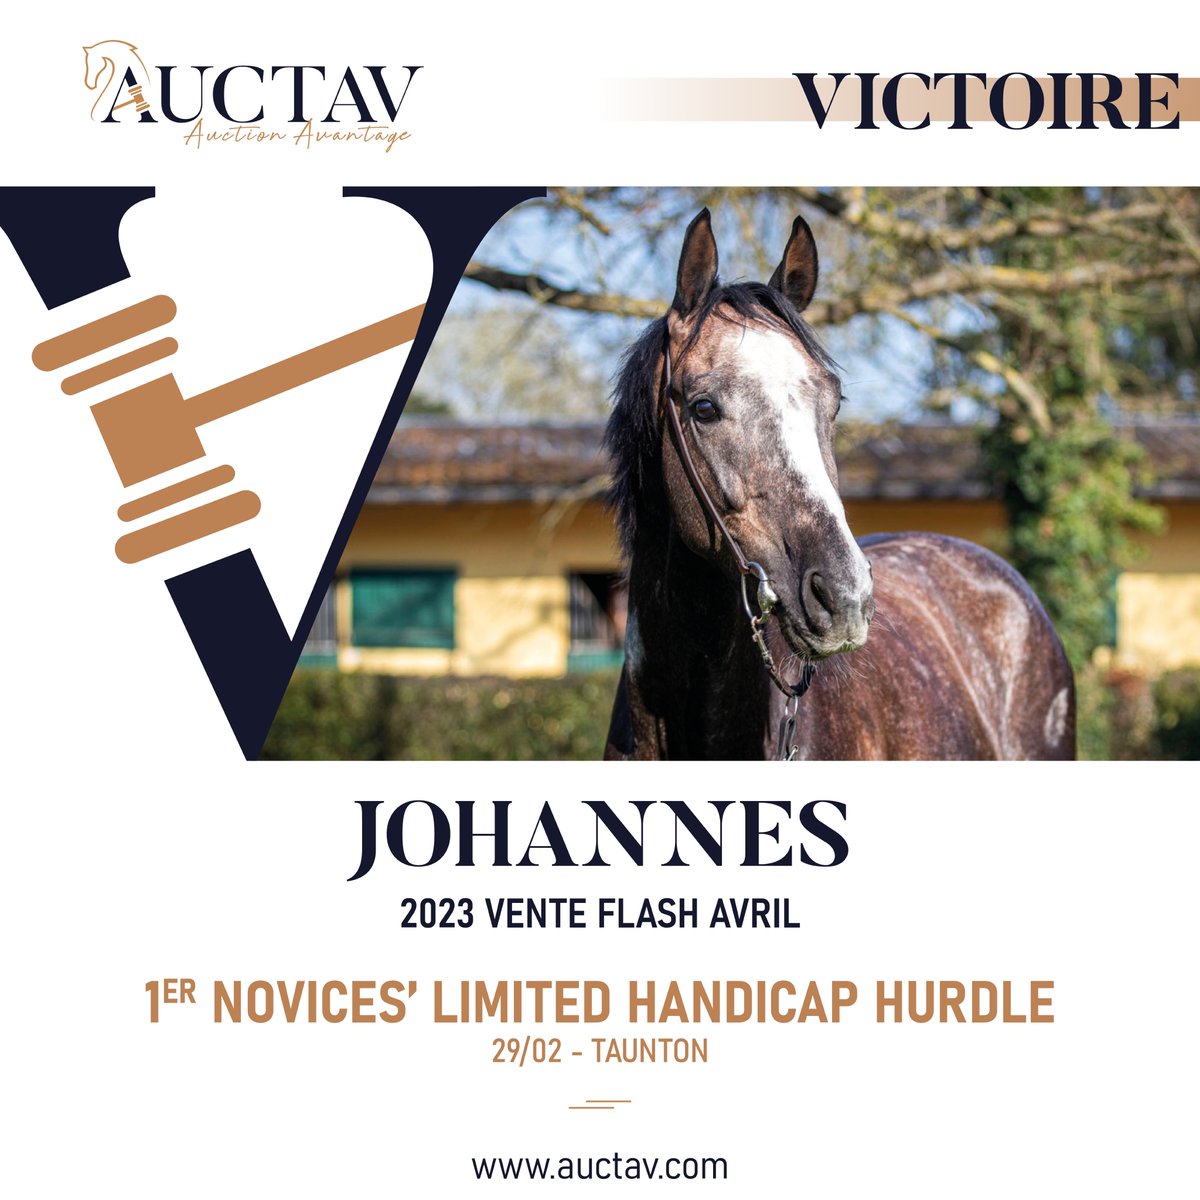 🥇 JOHANNES made it all to win yesterday at @TauntonRacing, his 2nd career-win and first since purchased by @JonesToby86 at the 2023 April Flash Sale. Entrusted to @DavidPipeRacing & @jacktudor9, he sports the colors of Livin' The Dream. 
Congrats to all!